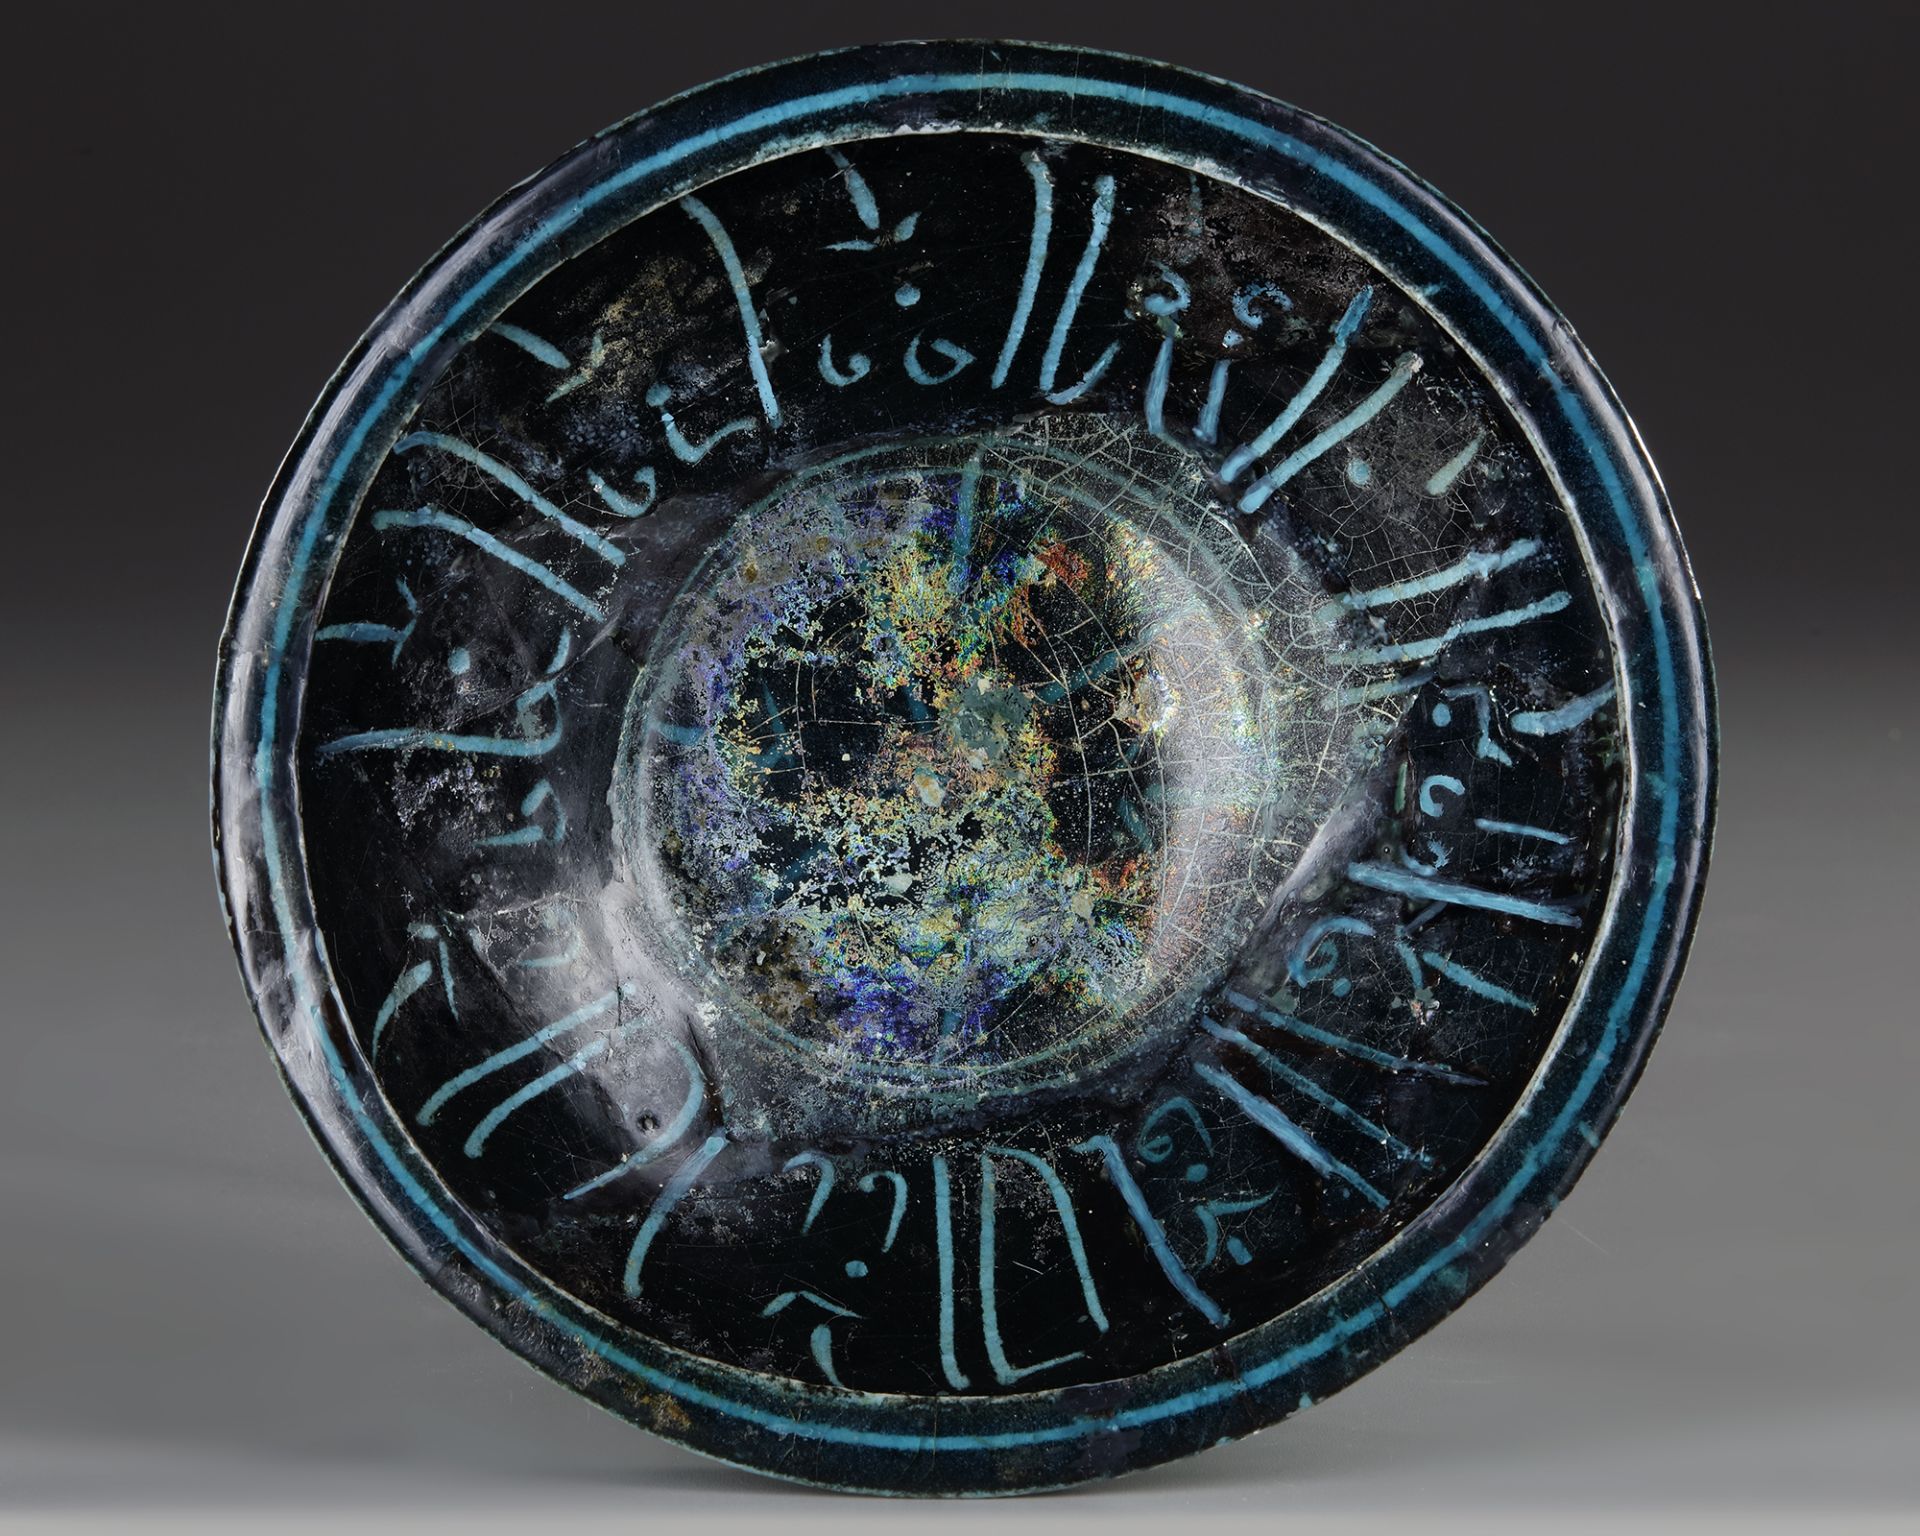 A BLACK AND TURQUOISE GLAZED KASHAN BOWL, PERSIA, 13TH CENTURY